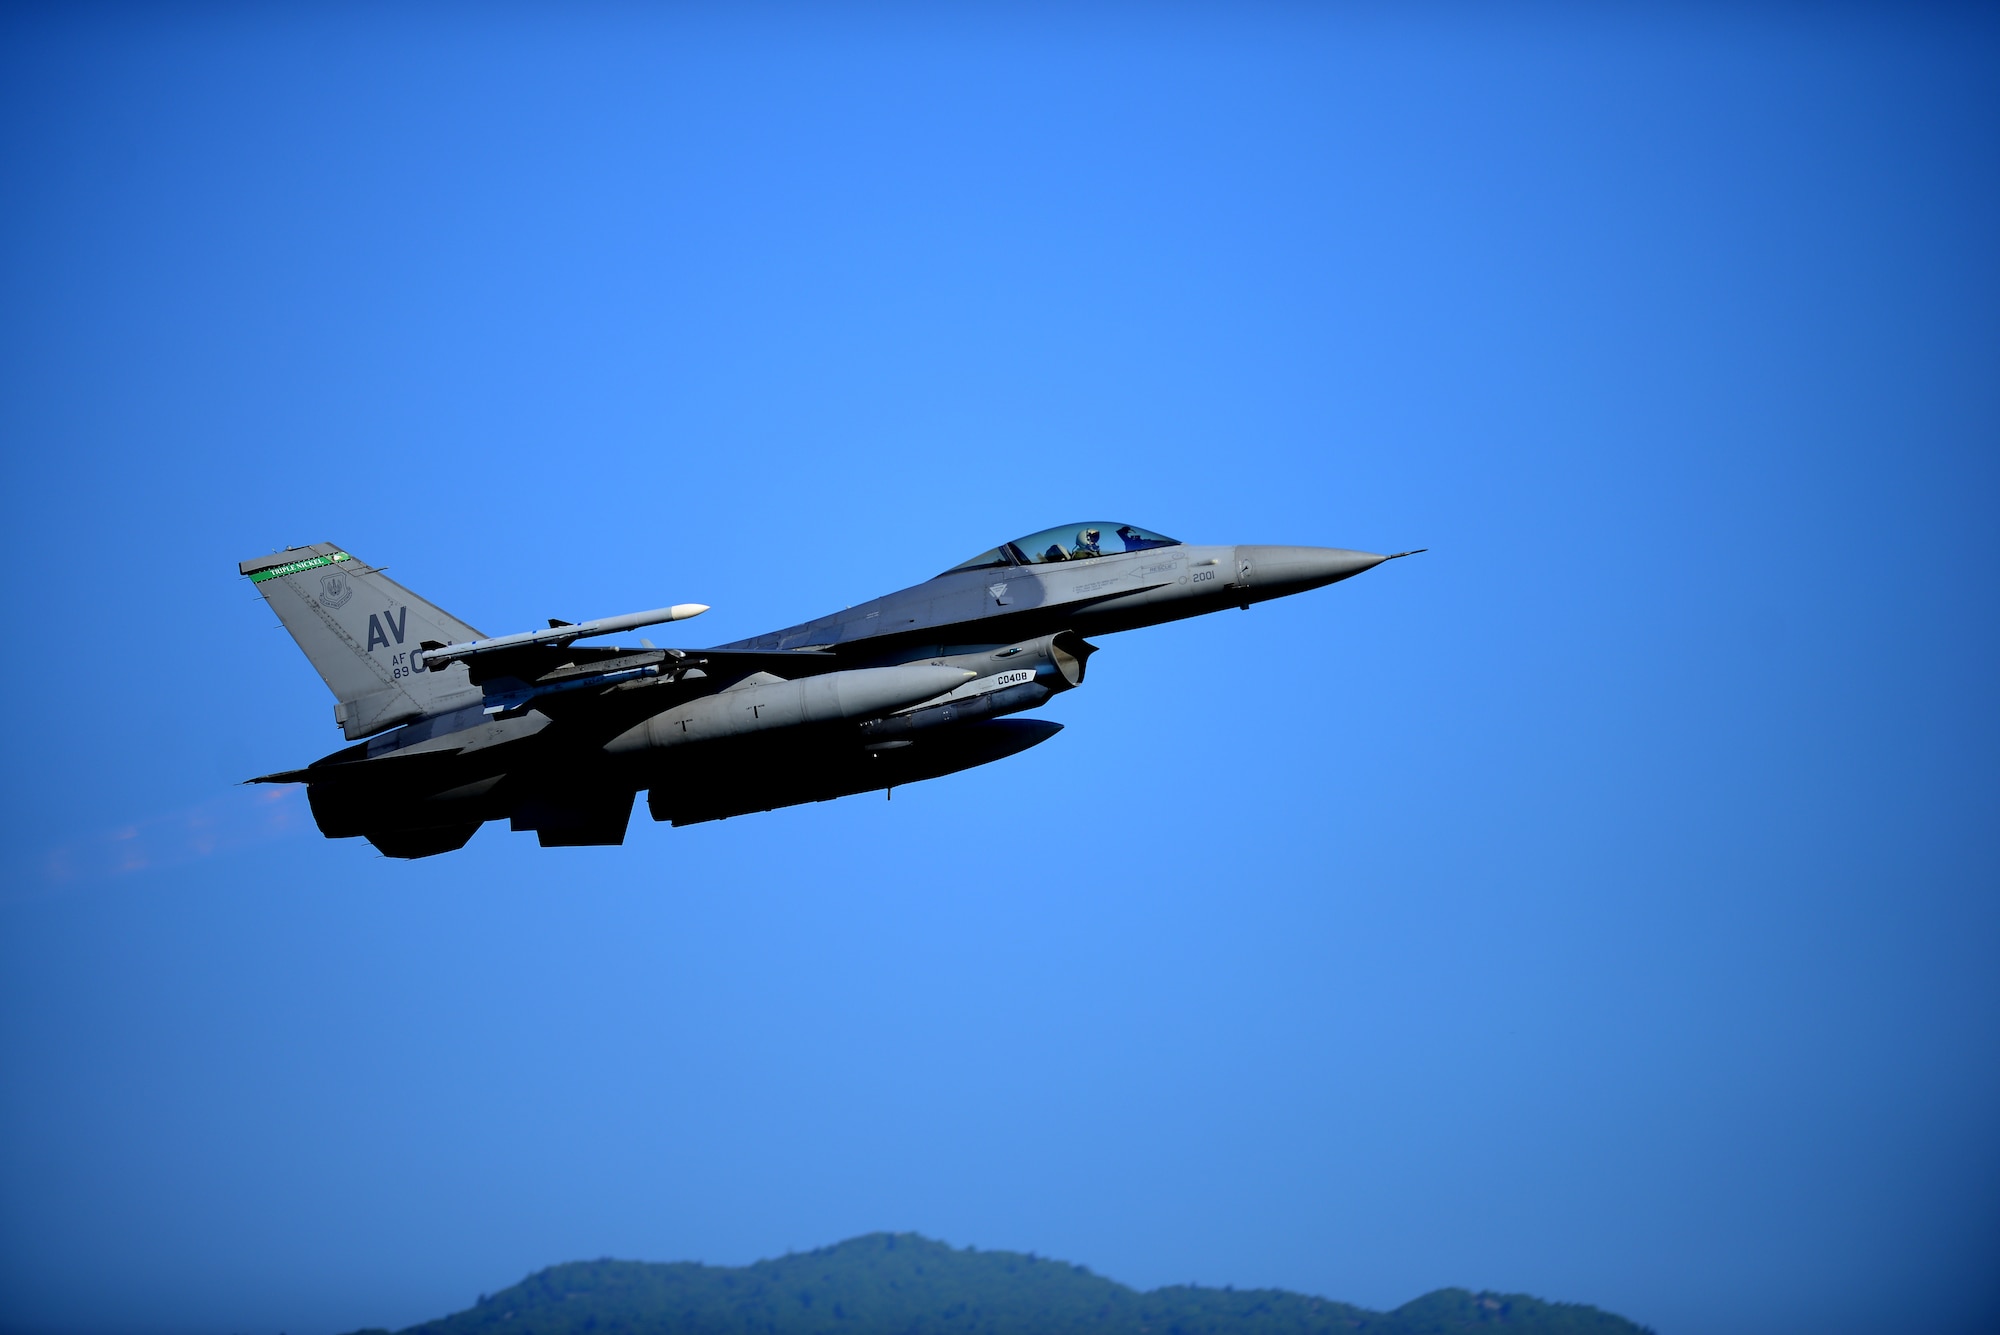 An F-16 Fighting Falcon from the 555th Fighter Squadron takes off on the first day of Astral Knight 19 at Aviano Air Base, Italy, on June 3, 2019. Astral Knight is a multinational integrated air and missile defense exercise involving forces from the U.S., Italy, Croatia and Slovenia. (U.S. Air Force photo by Airman 1st Class Caleb House)